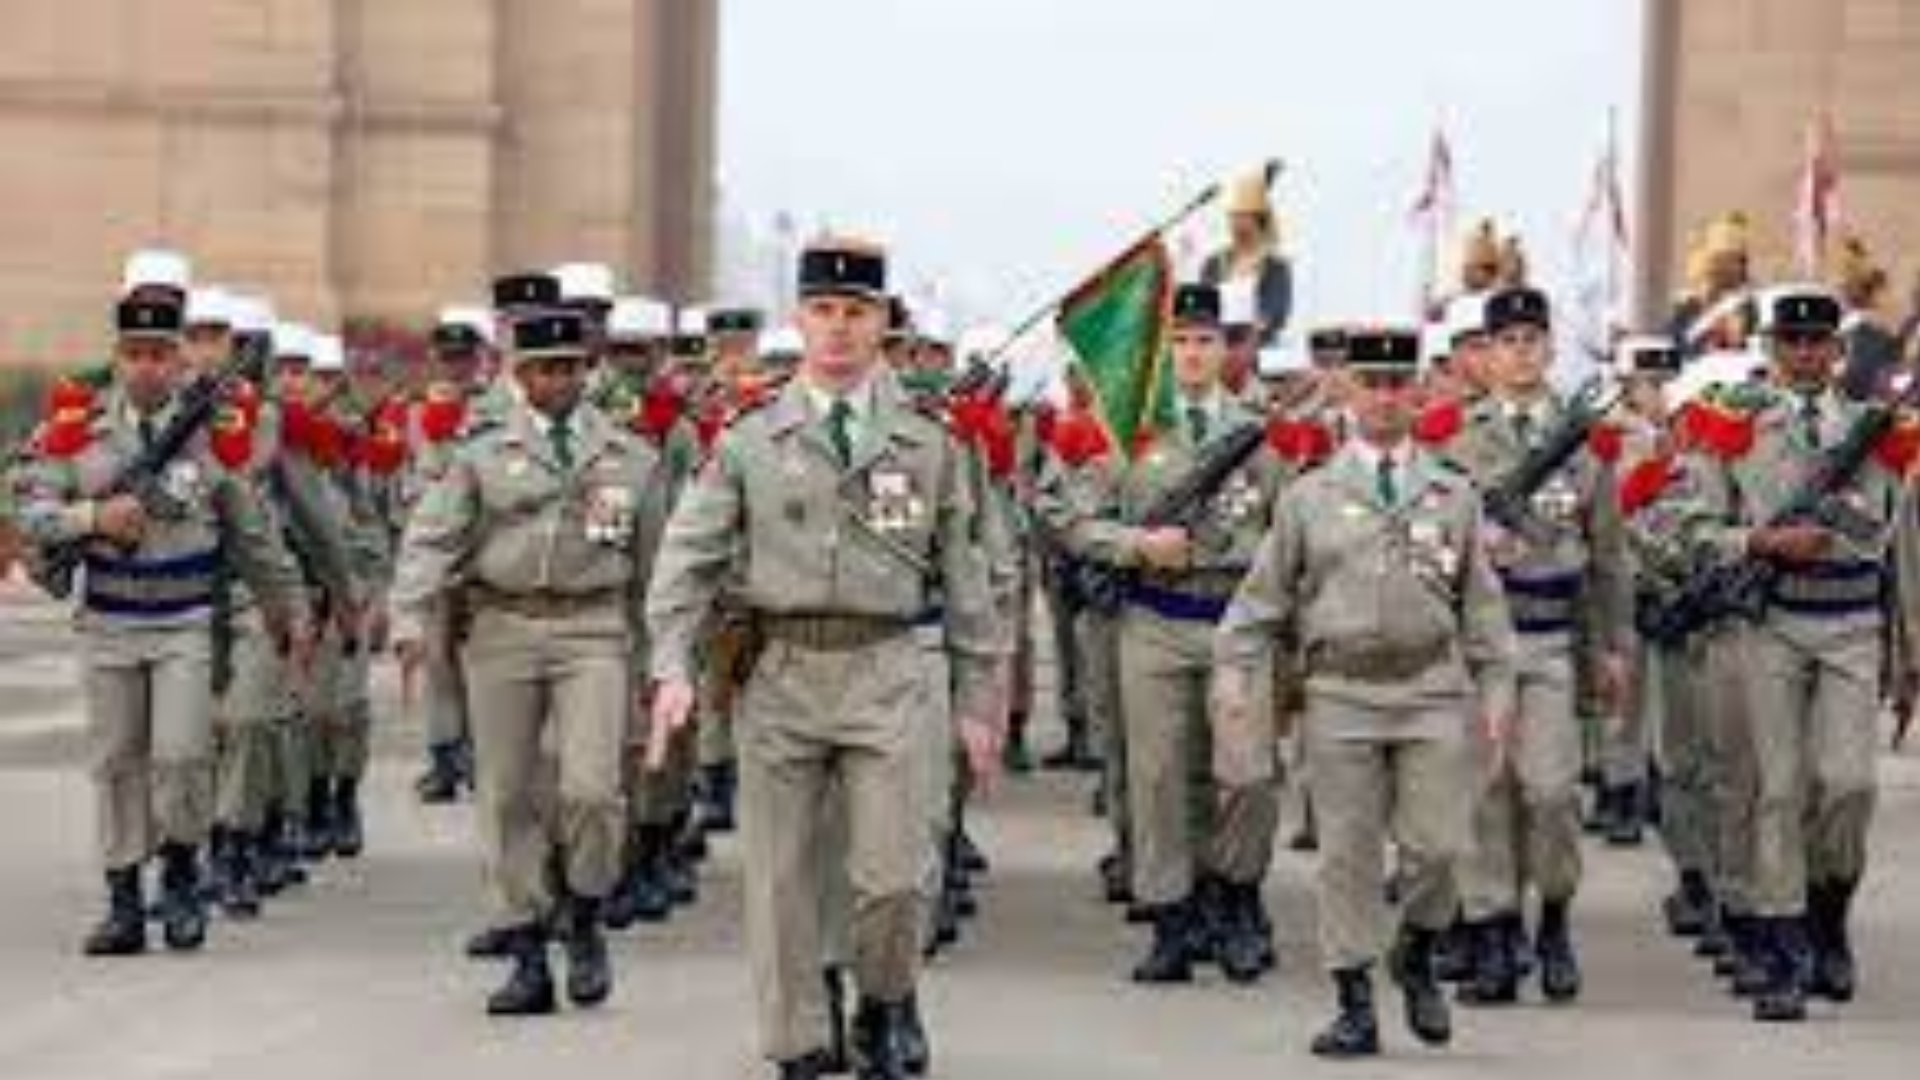 French contingent is set to join 75th Republic Day Parade in New Delhi